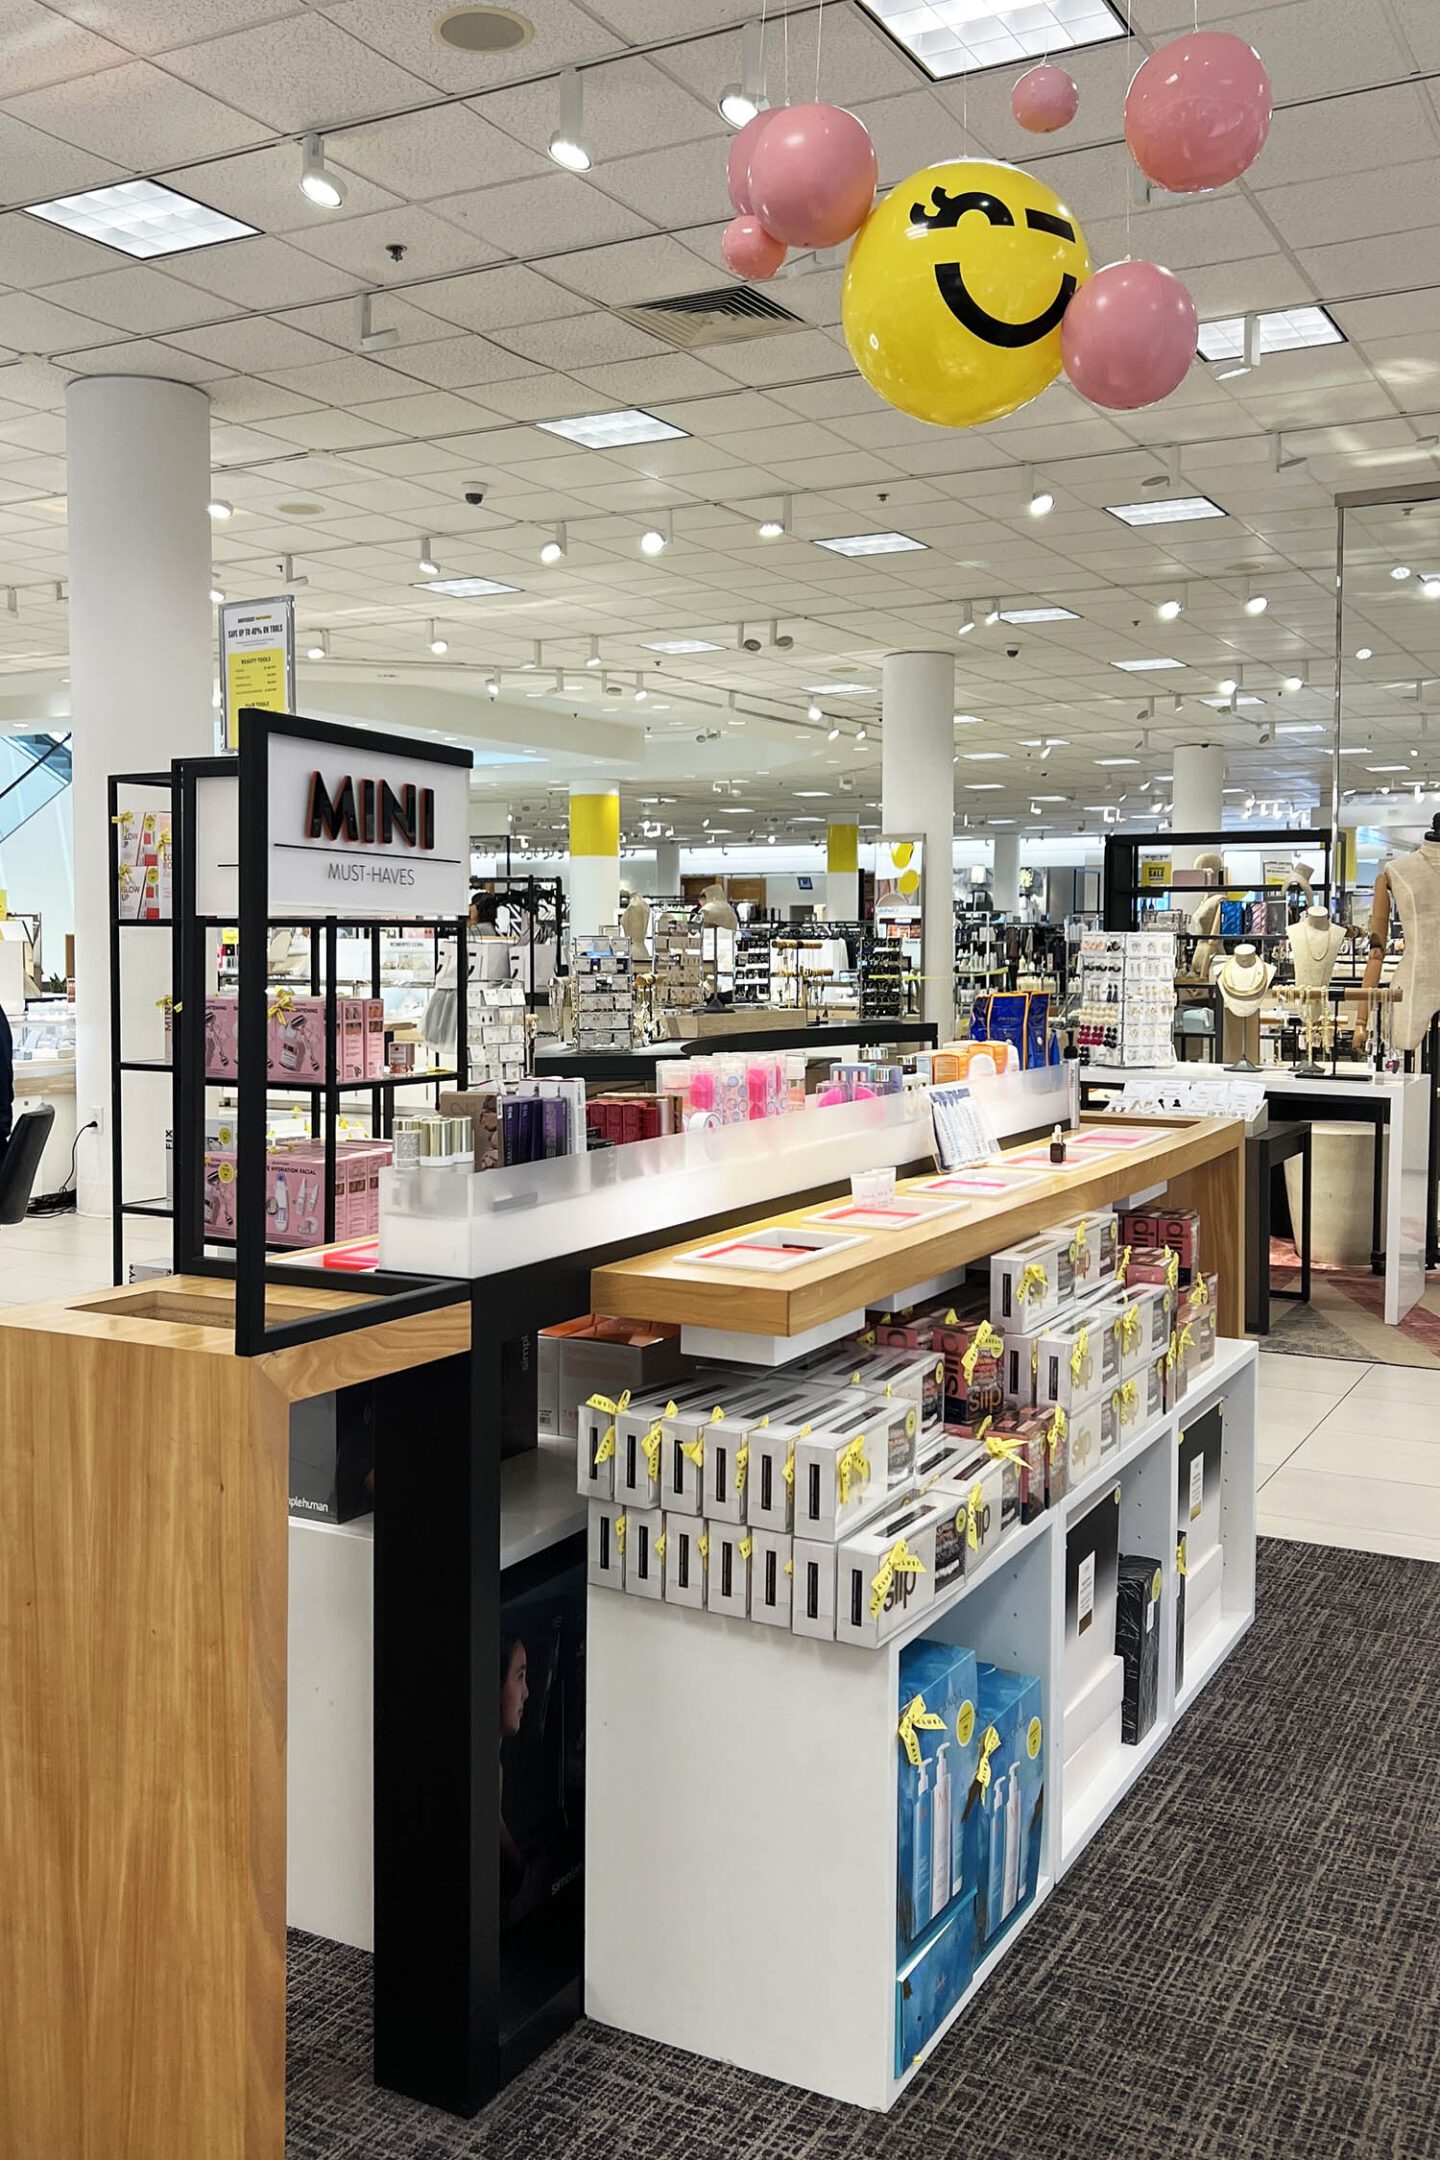 Nordstrom Anniversary Sale 2023 Beauty Exclusives